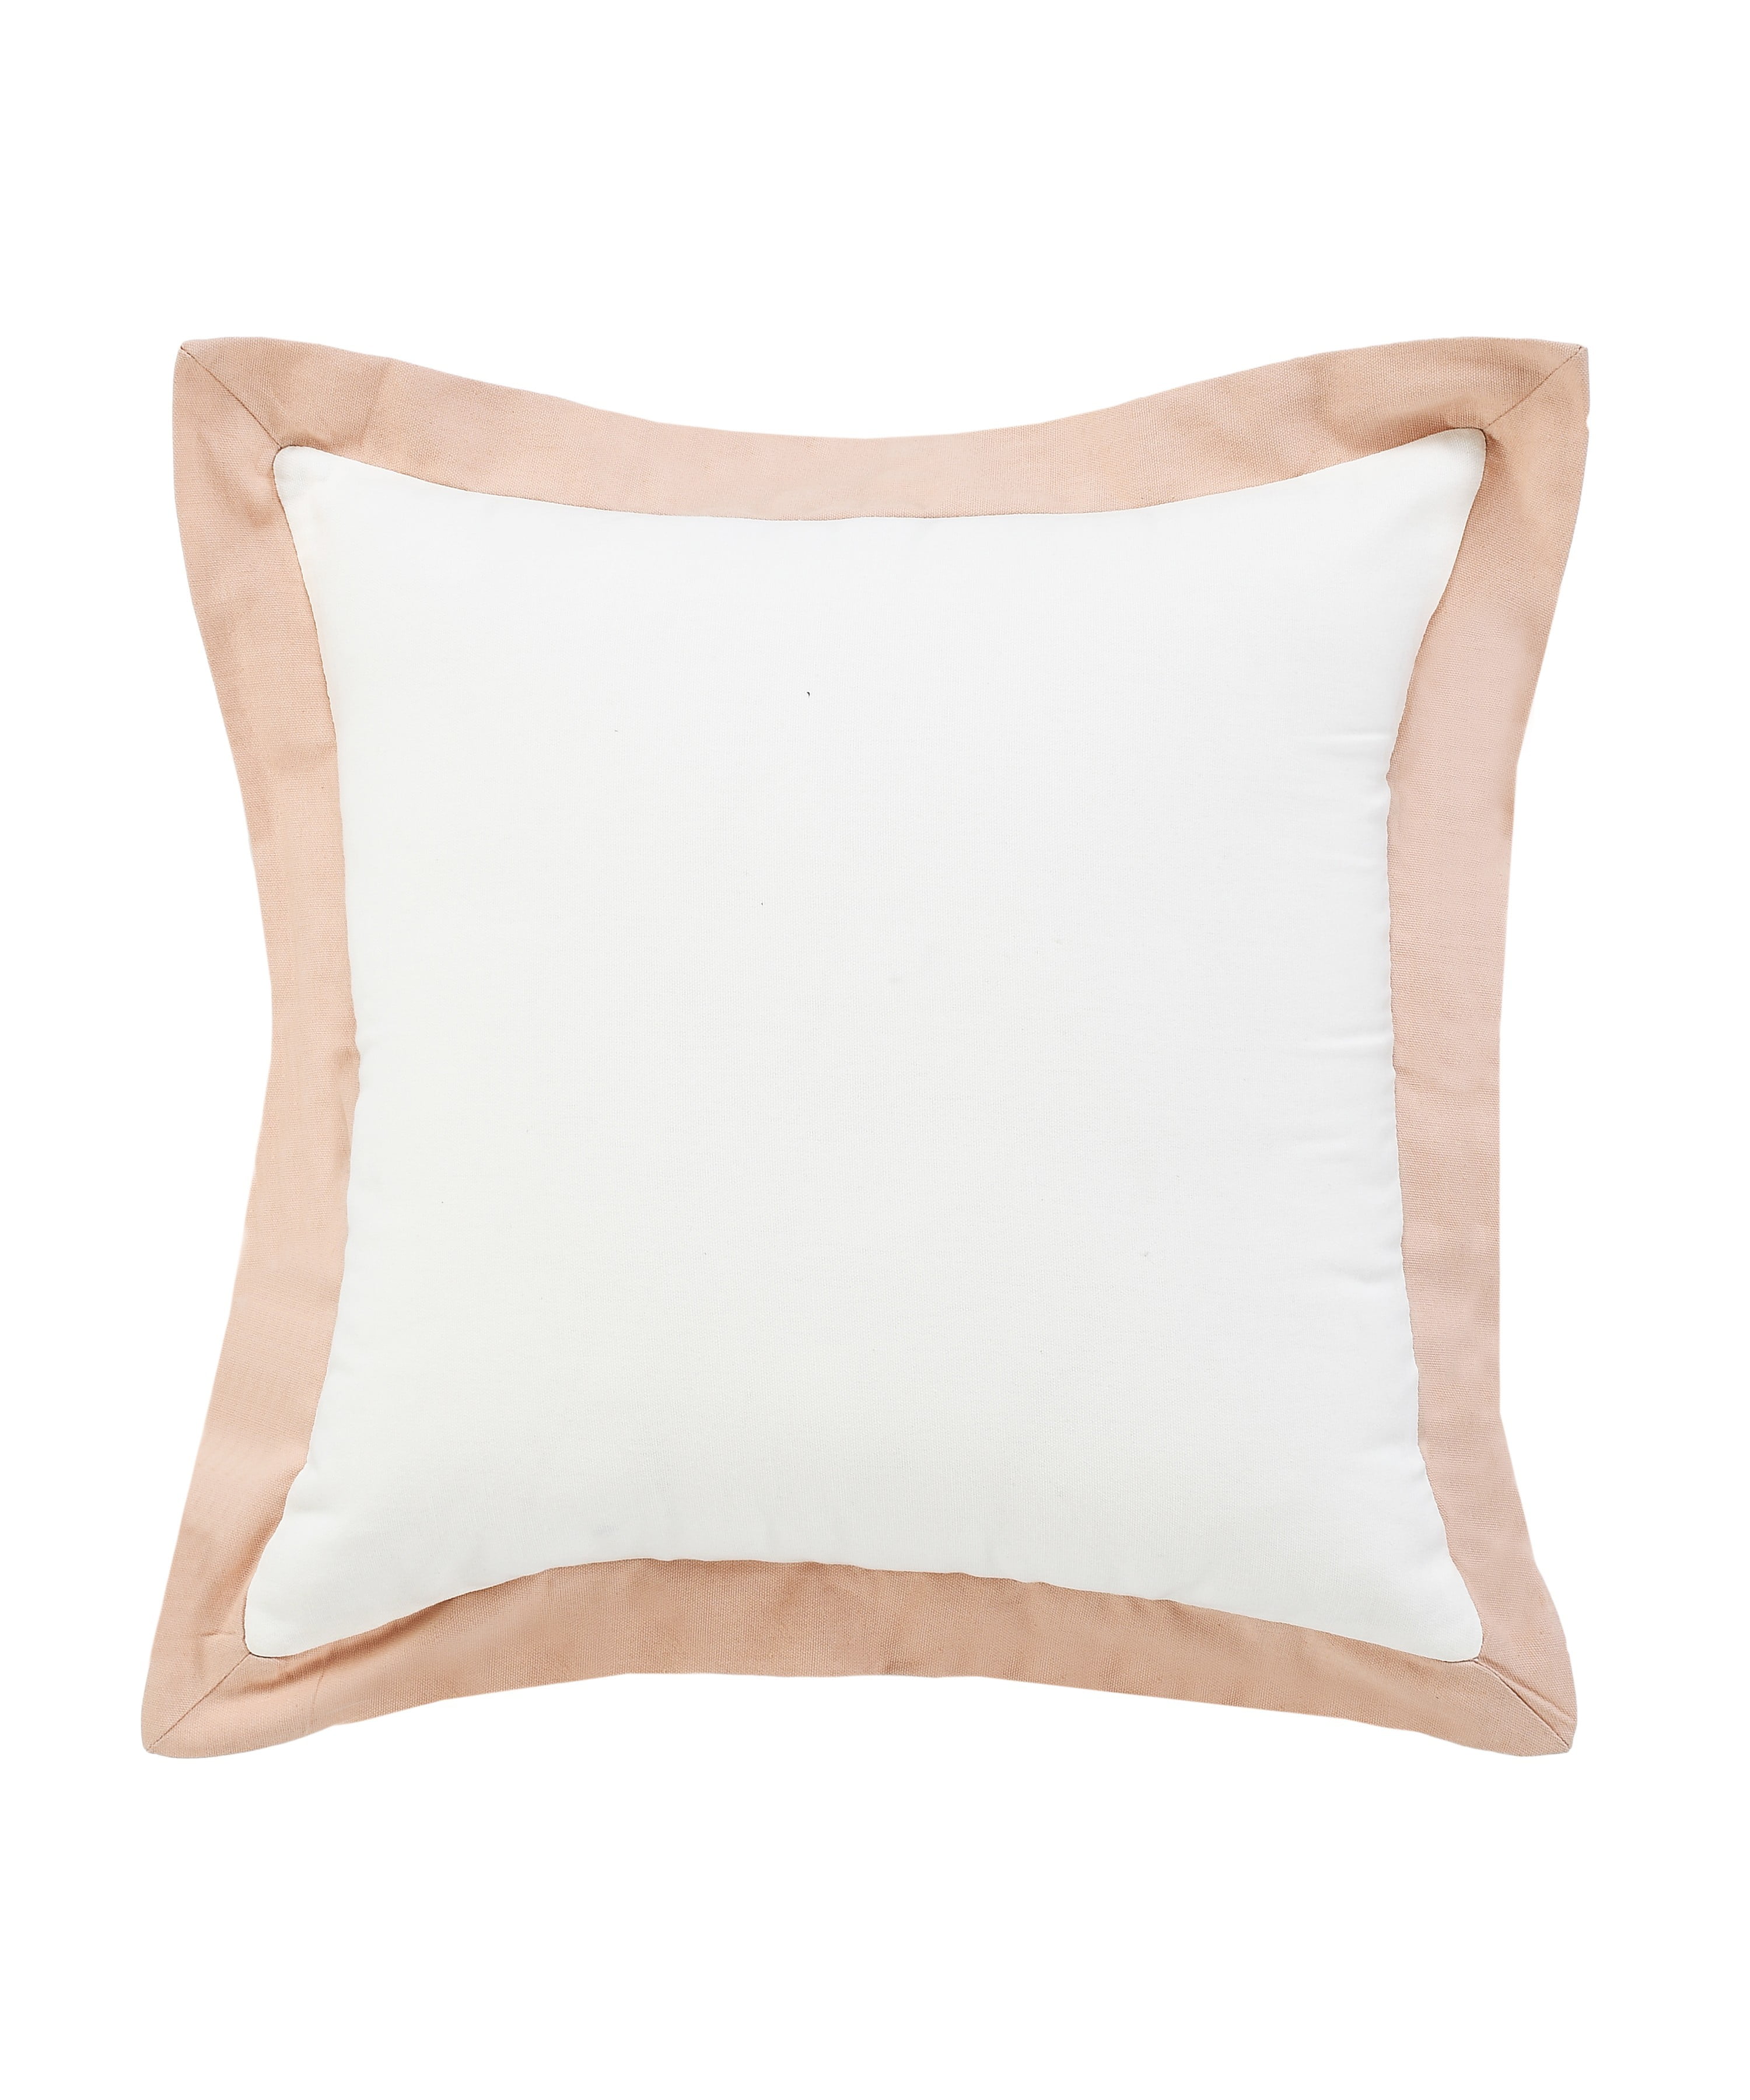 LR Home Polyester Neutral Tan Lumbar Throw Pillow, 1 Count (Pack of 1)